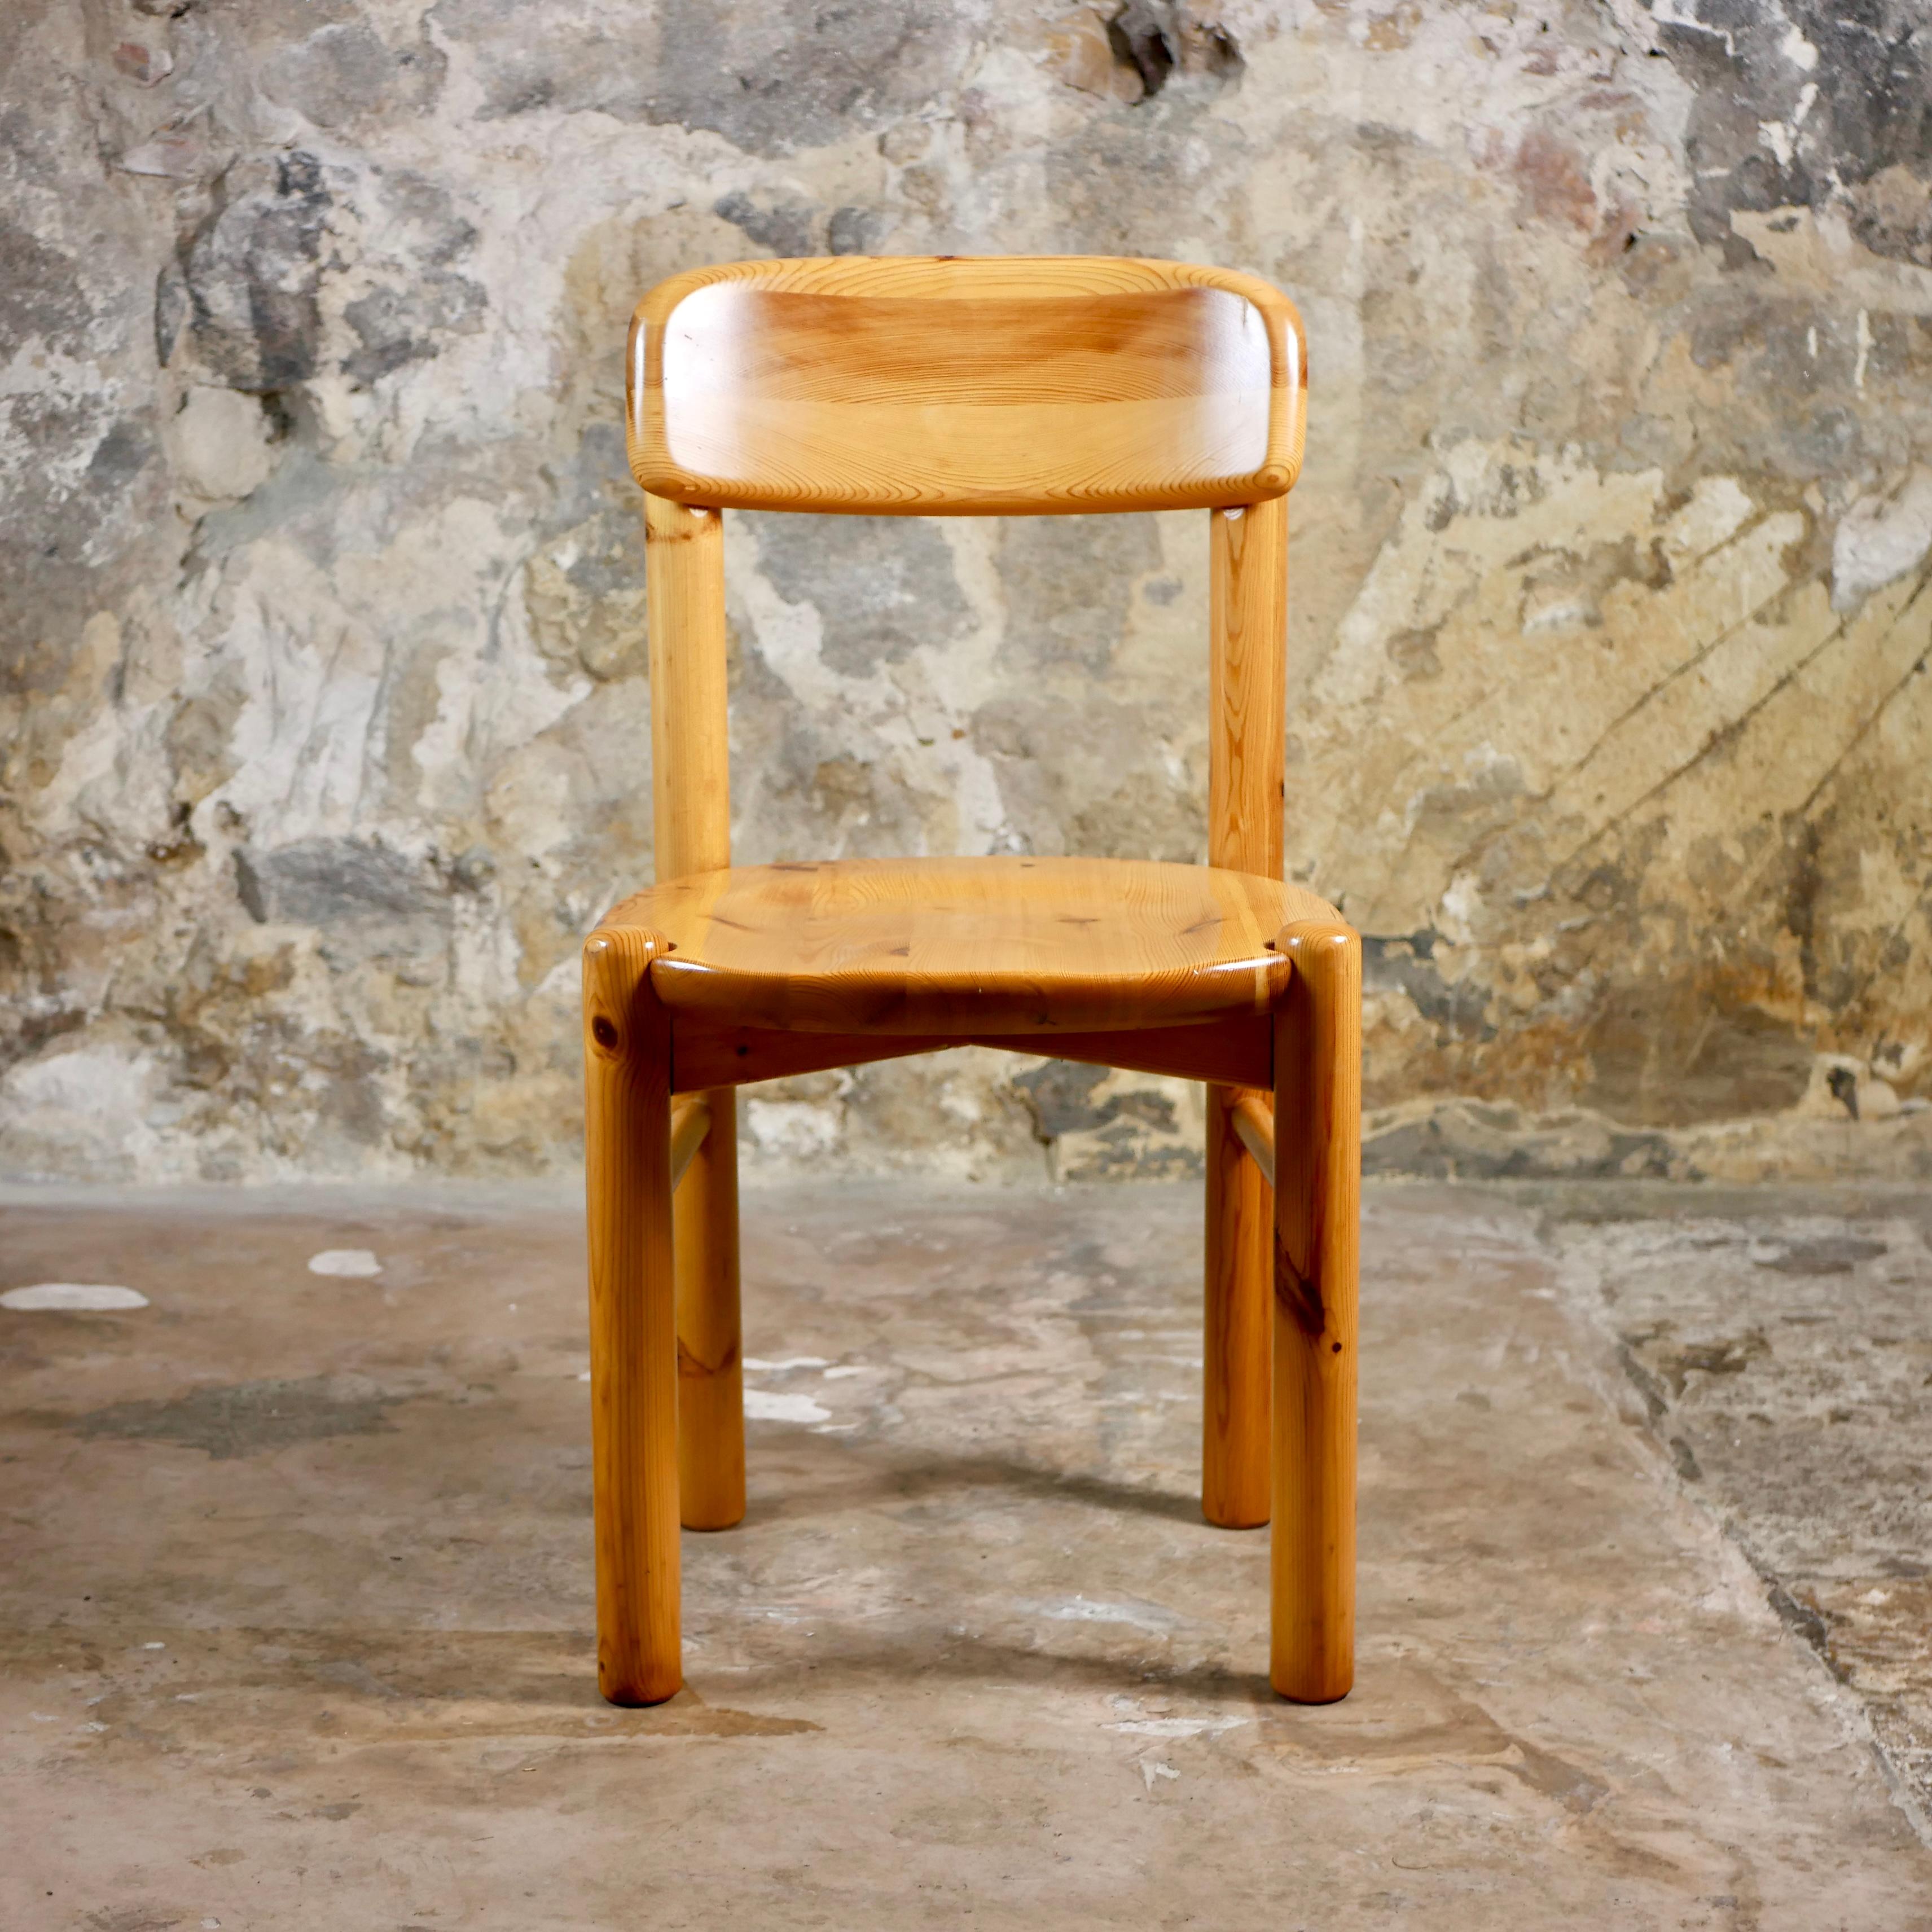 Pine Set of 6 pine chairs by Rainer Daumiller for Hirsthals Savvaerk, Denmark, 1960s For Sale